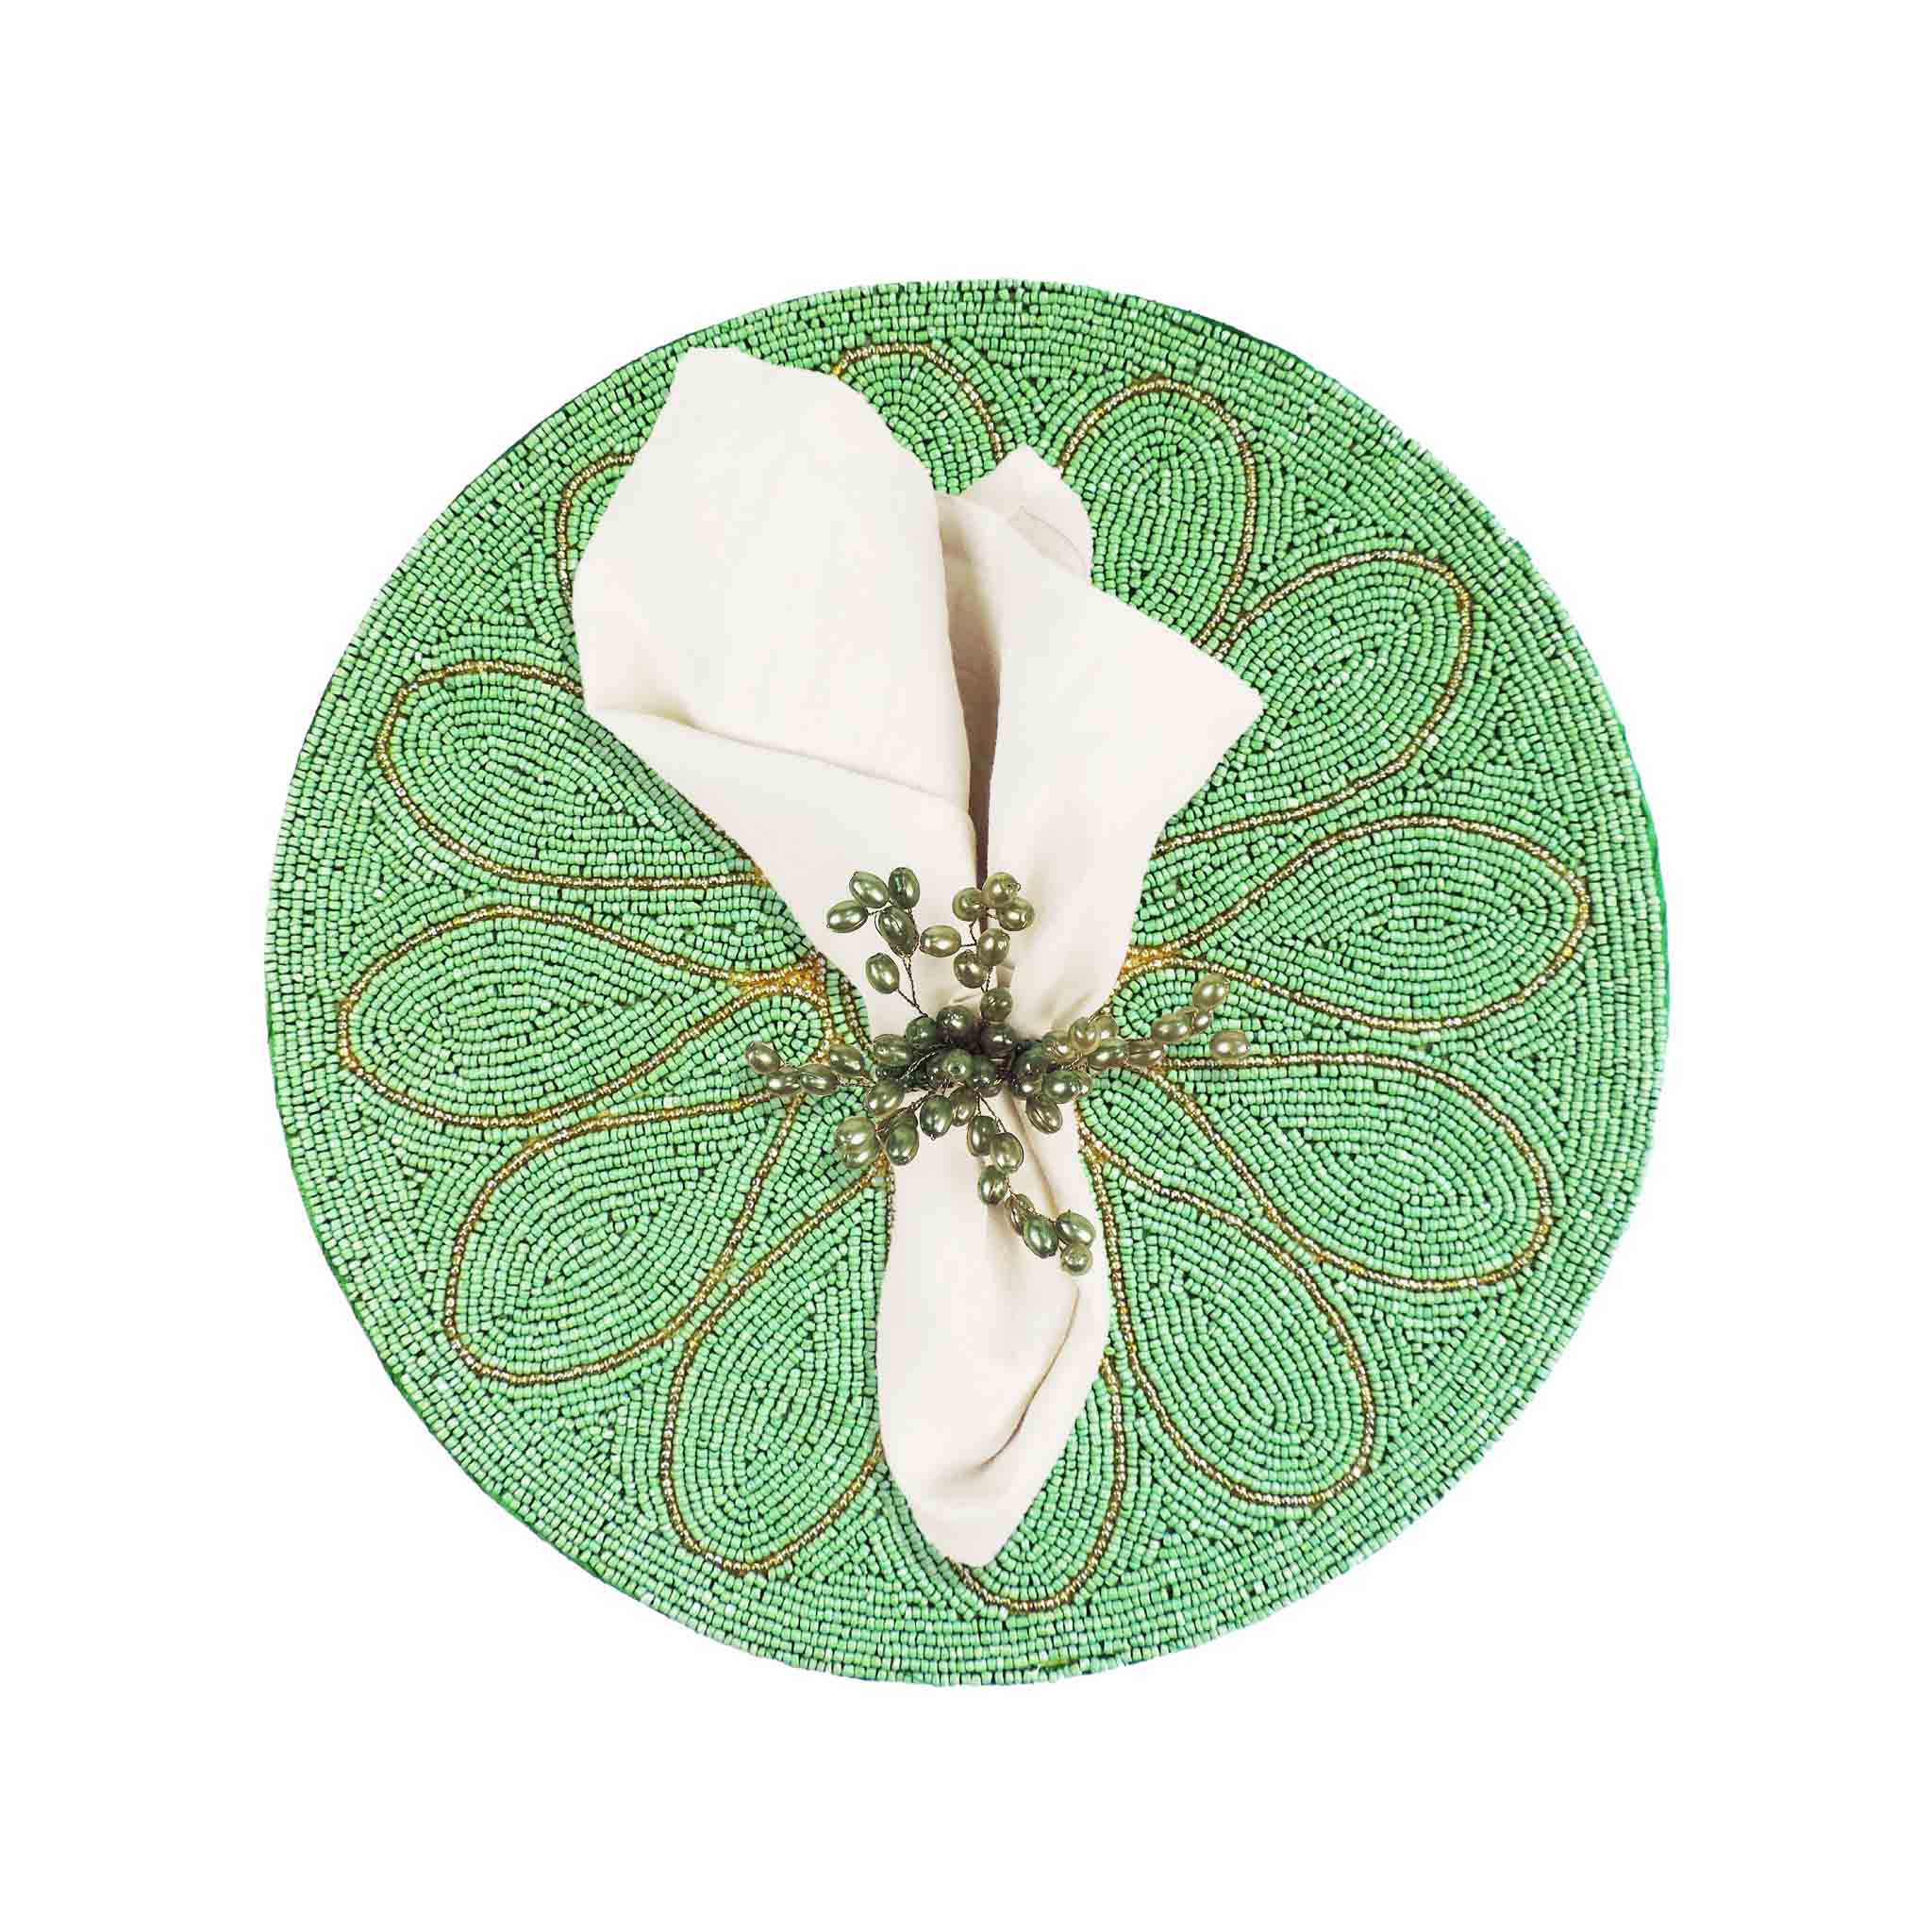 Petal Impressions Bead Embroidered Placemat in Pale Green, Set of 2/4